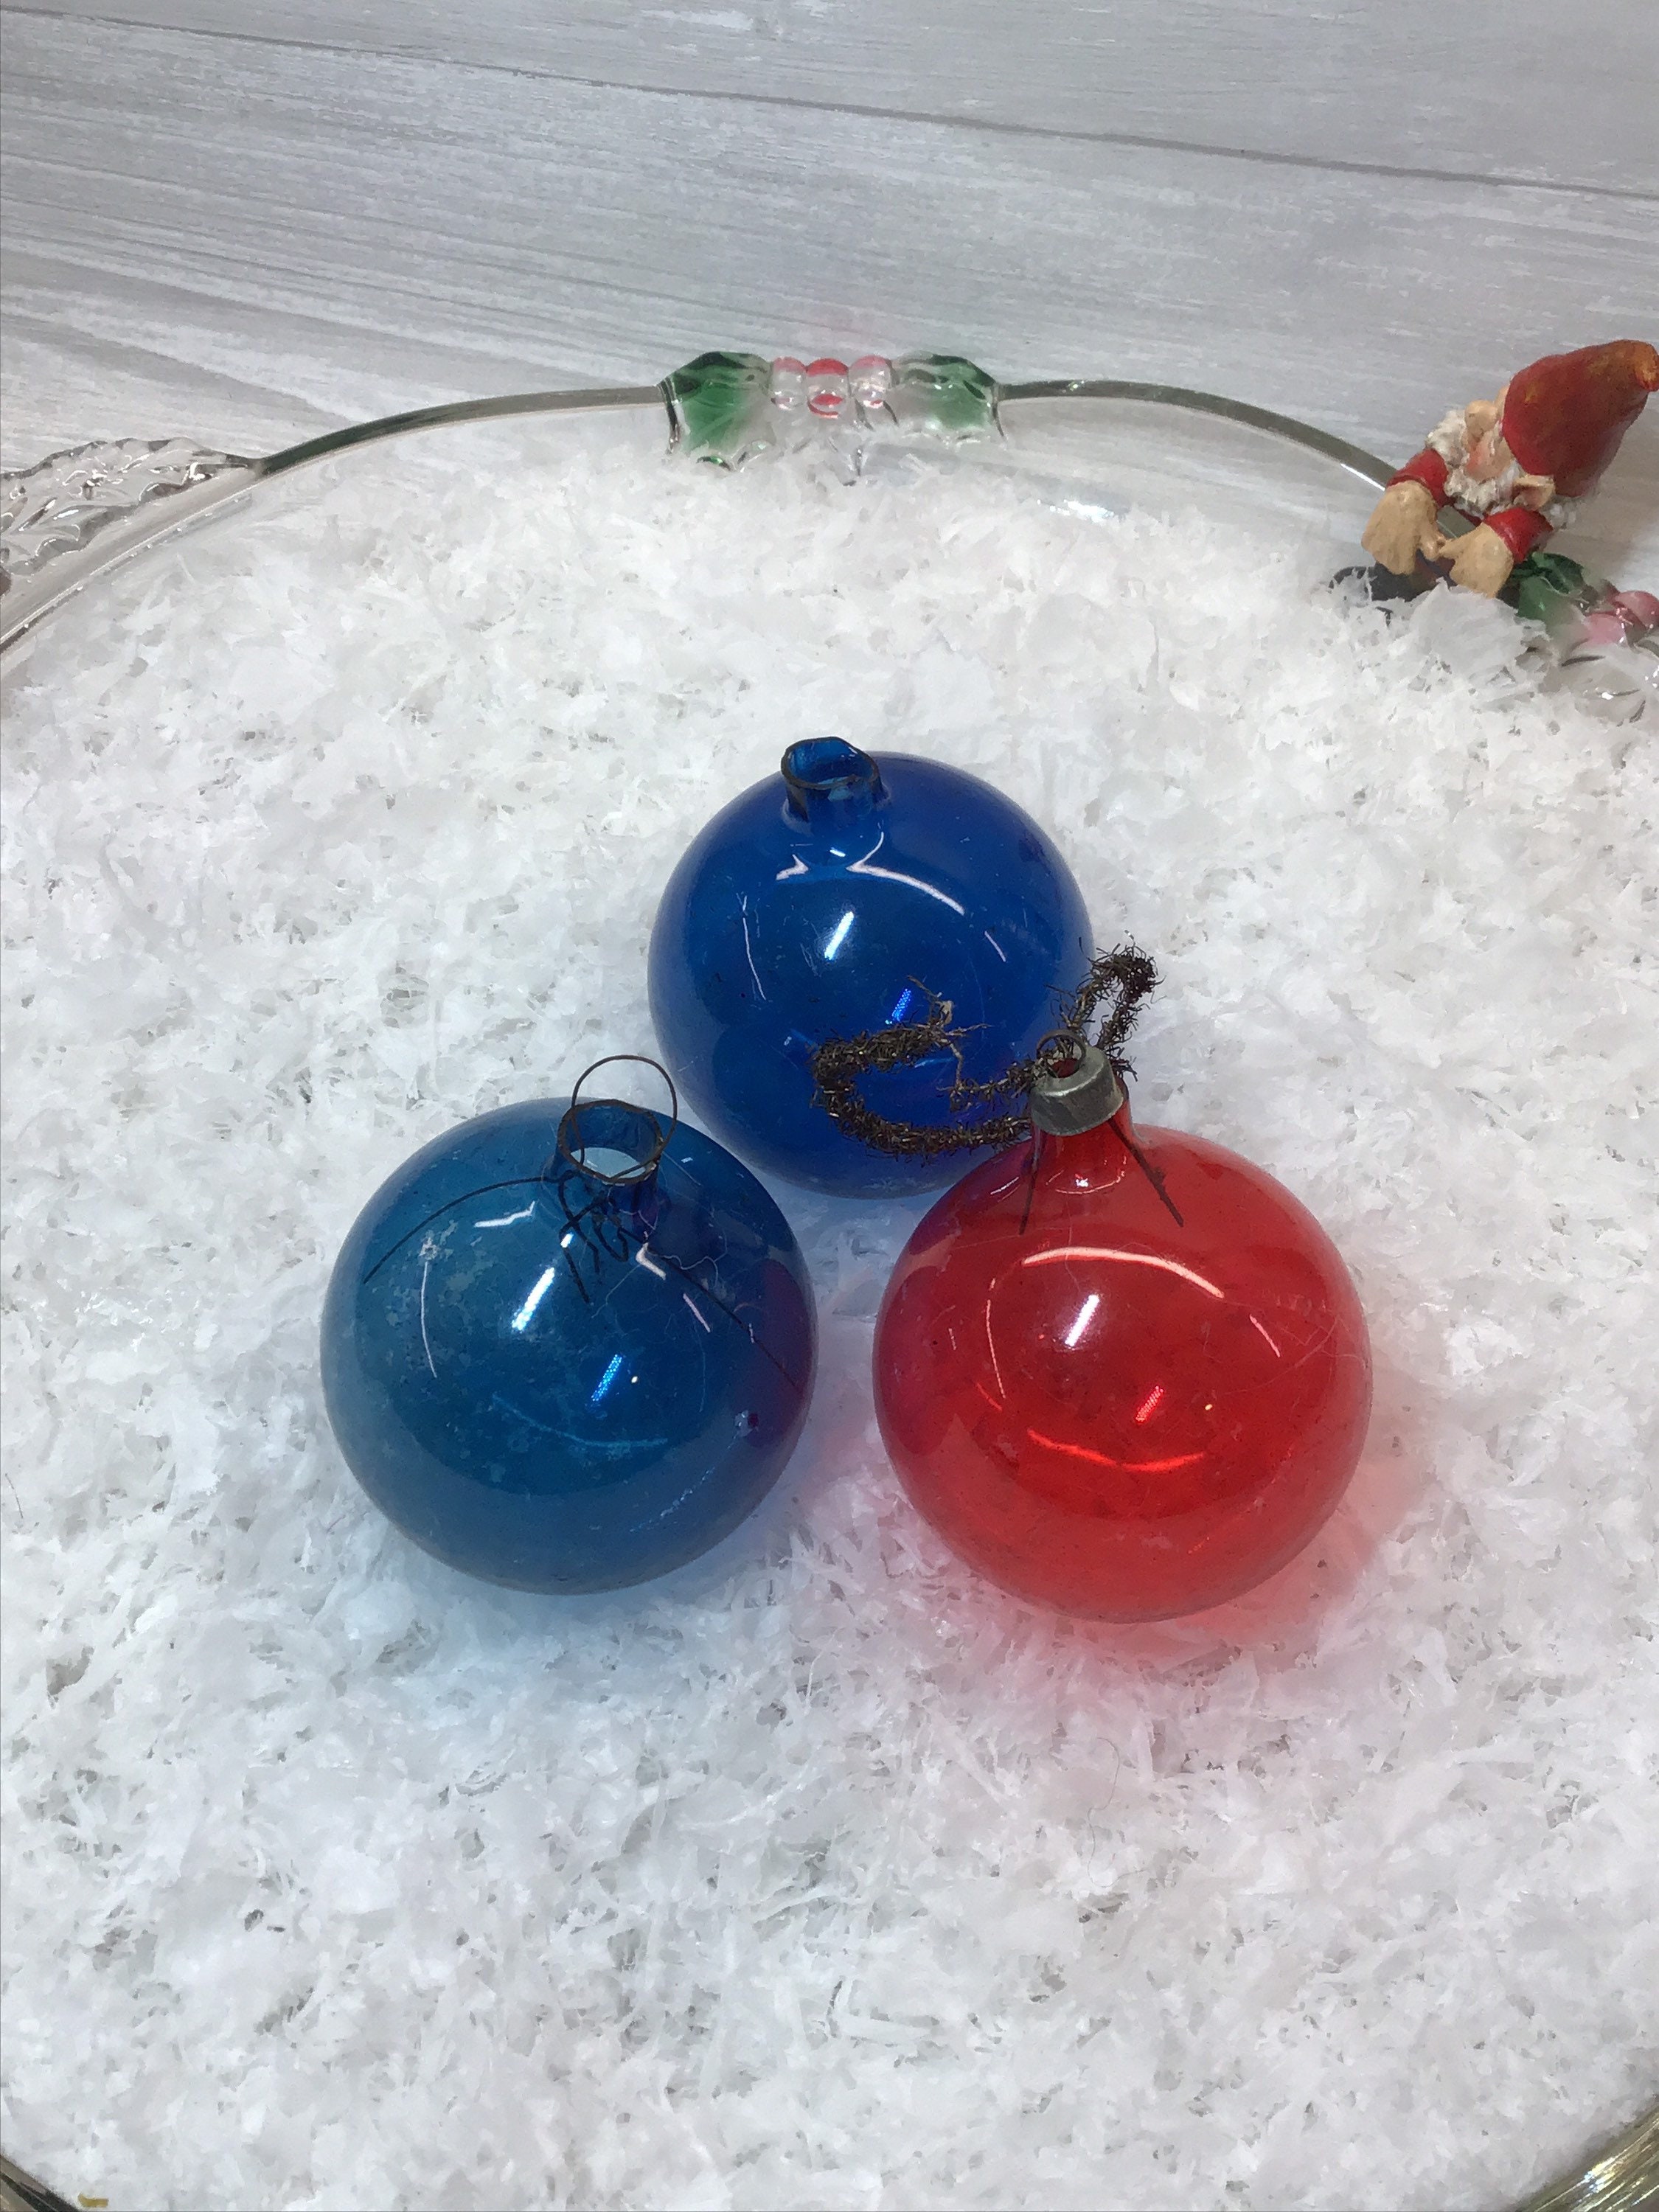 Vintage Lot Of 3 1970s Currier & Ives Corning Glass Christmas Ornament  Balls